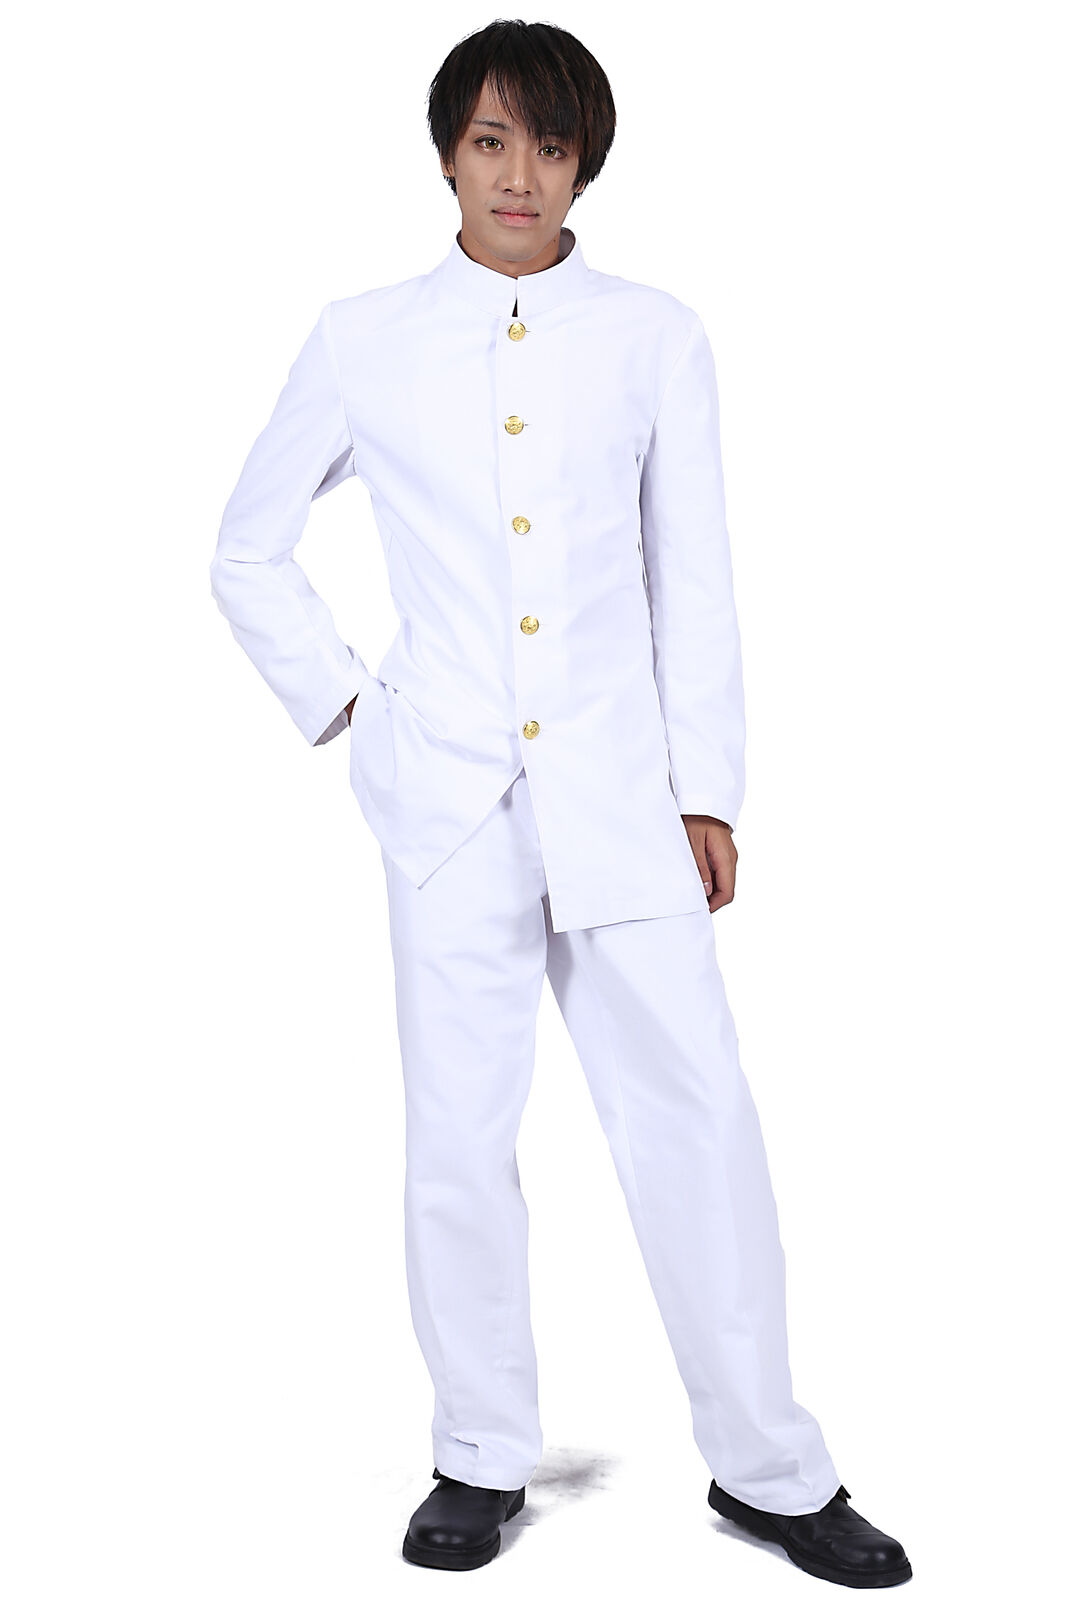 Halloween Japanese Anime Cosplay Costume White Male Formal School Uniform  Outfit | eBay